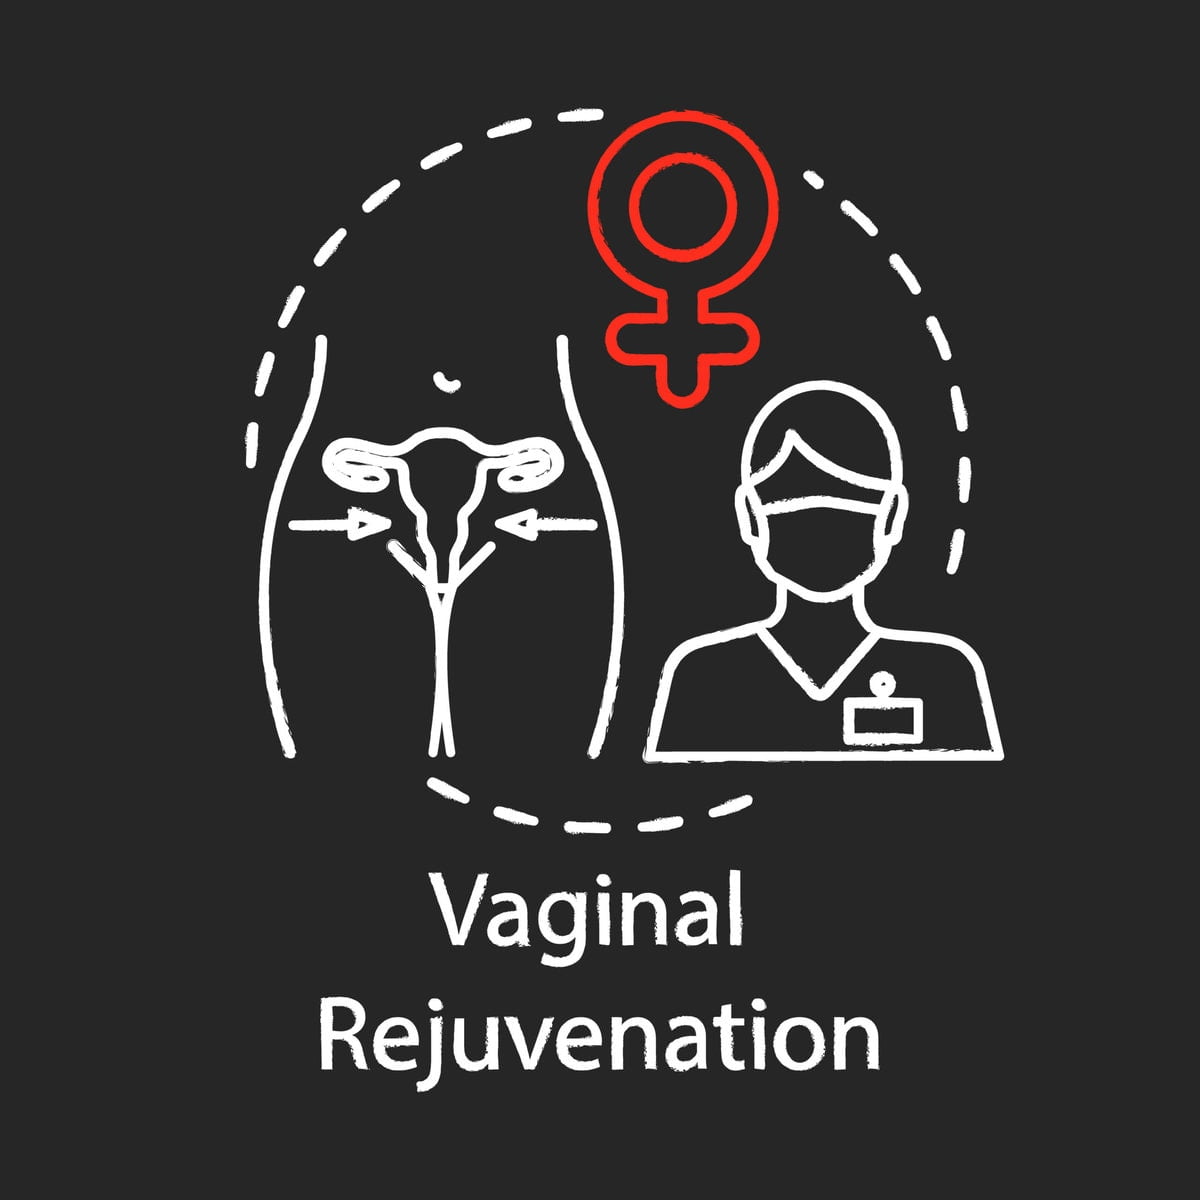 Vaginal rejuvenation is today's modern approach to rejuvenating the female genitalia. It is a one-of-a-kind treatment for women